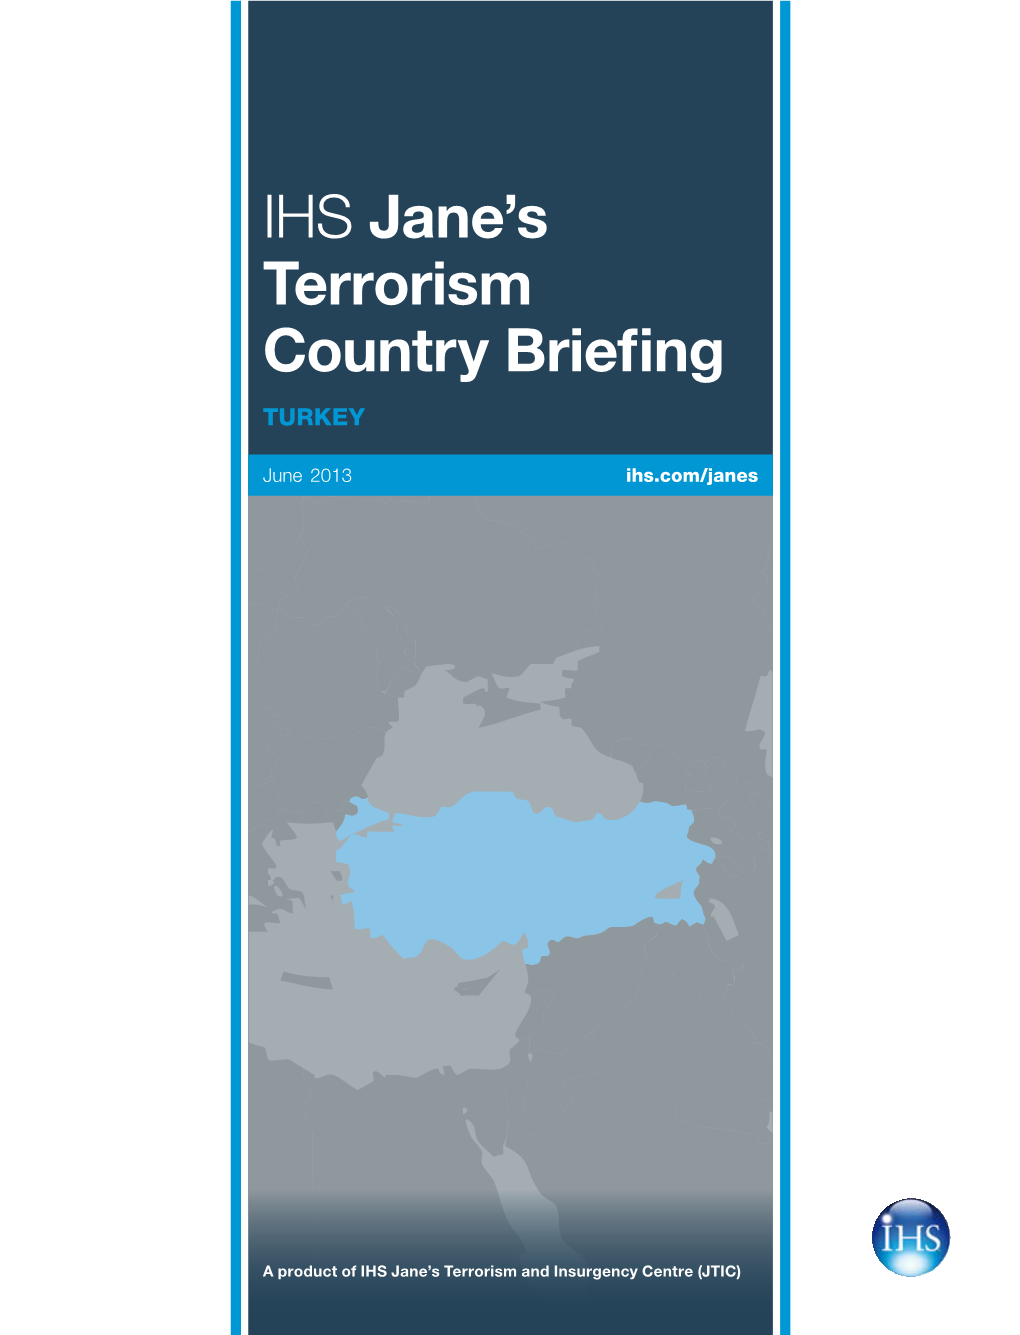 IHS Jane's Terrorism Country Briefing